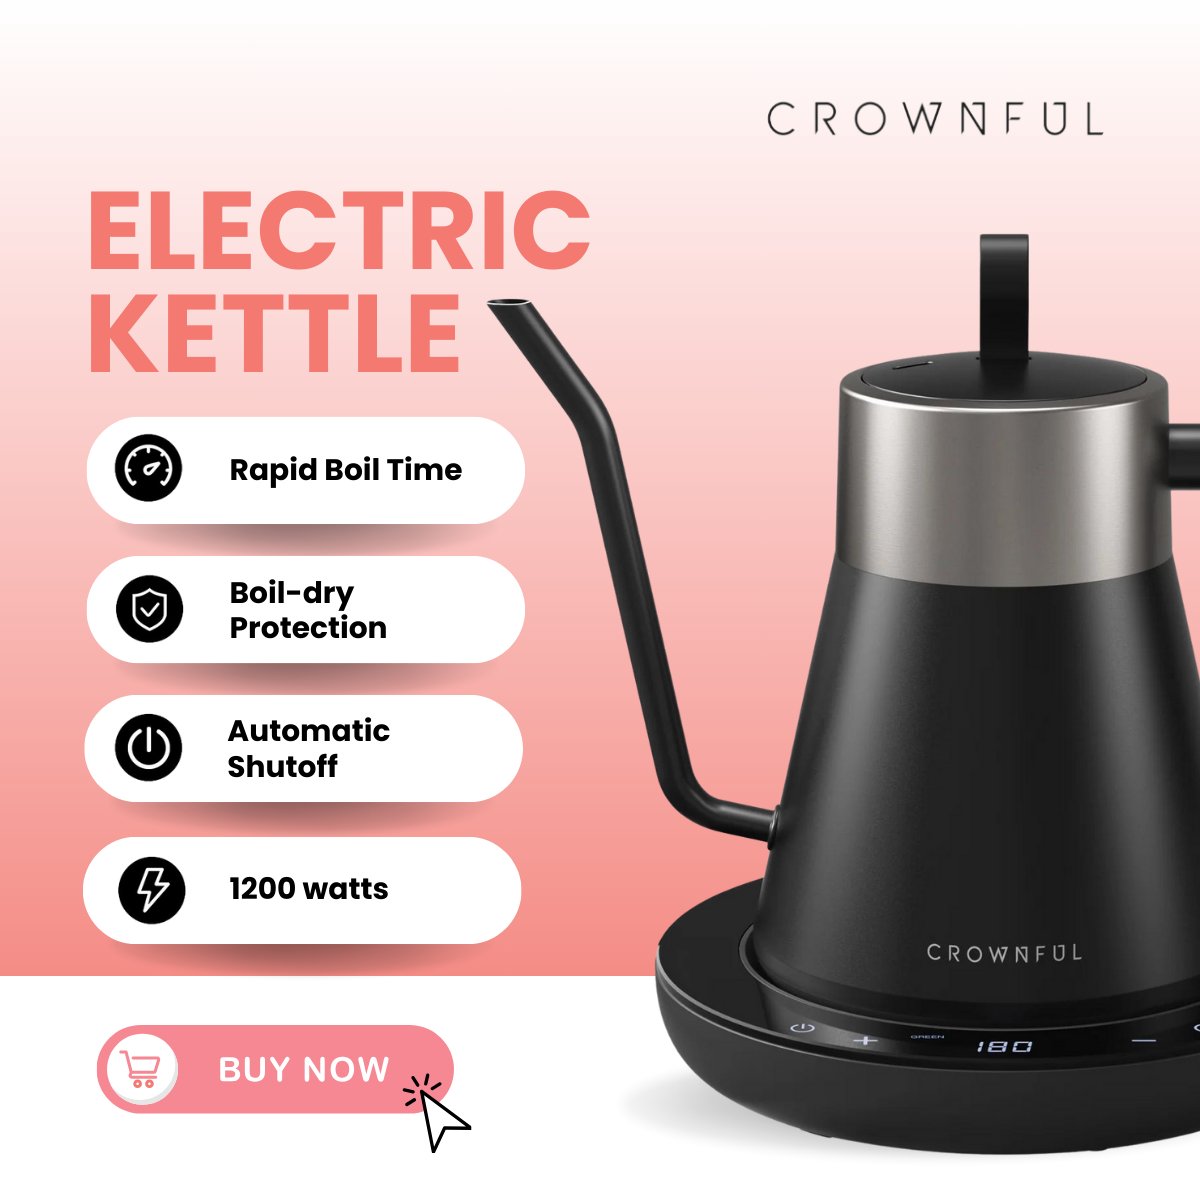 Meet your sleek kitchen essential! ⚡️ Say goodbye to hassle with our ELETRIC KETTLE featuring rapid boil, boil dry protection, and automatic shut-off. Get yours now! 🔥☕️ zurl.co/GVmR #EfficientBoiling #SmartKitchen #Crownful